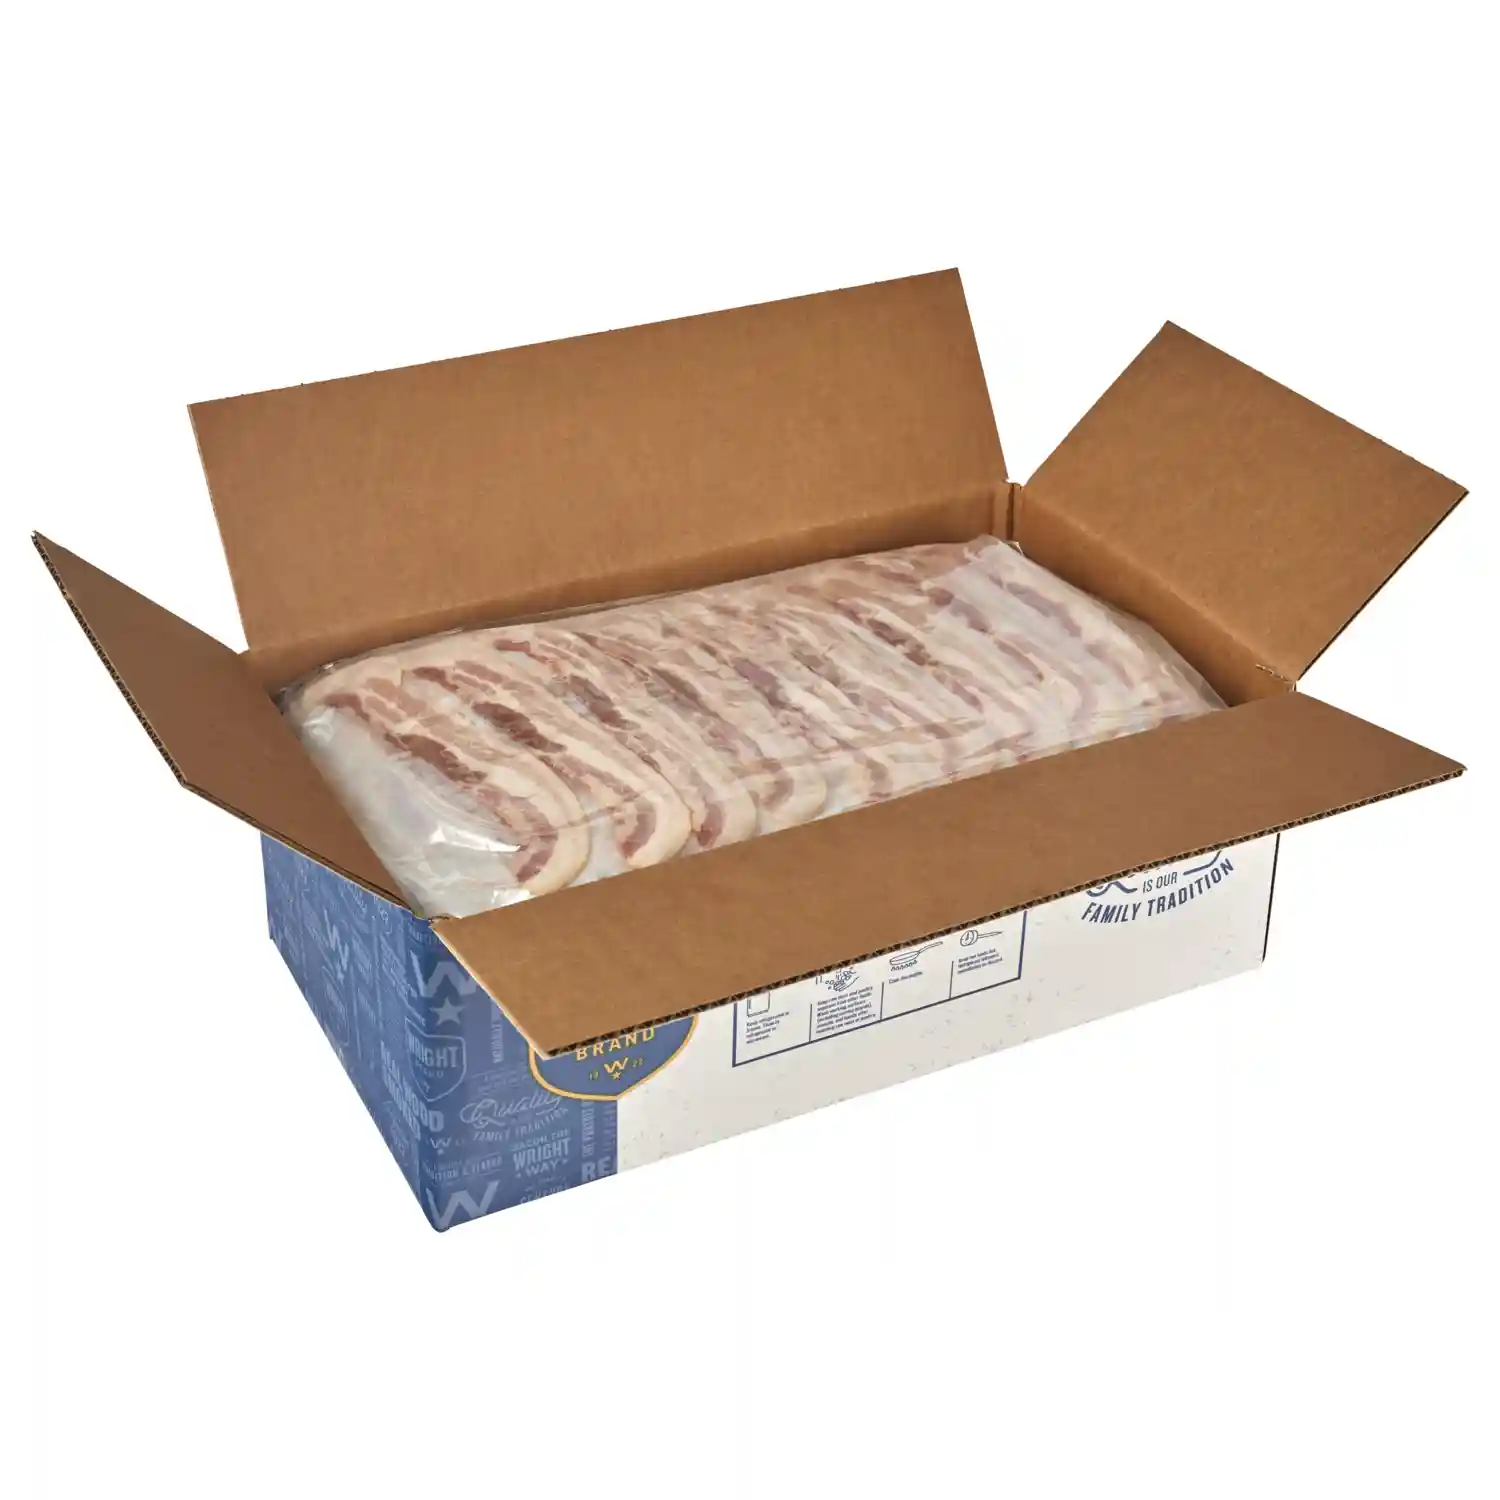 Wright® Brand Naturally Hickory Smoked Thick Sliced Bacon, Flat-Pack®, 10-14 Slices per Pound, Gas Flushed_image_41